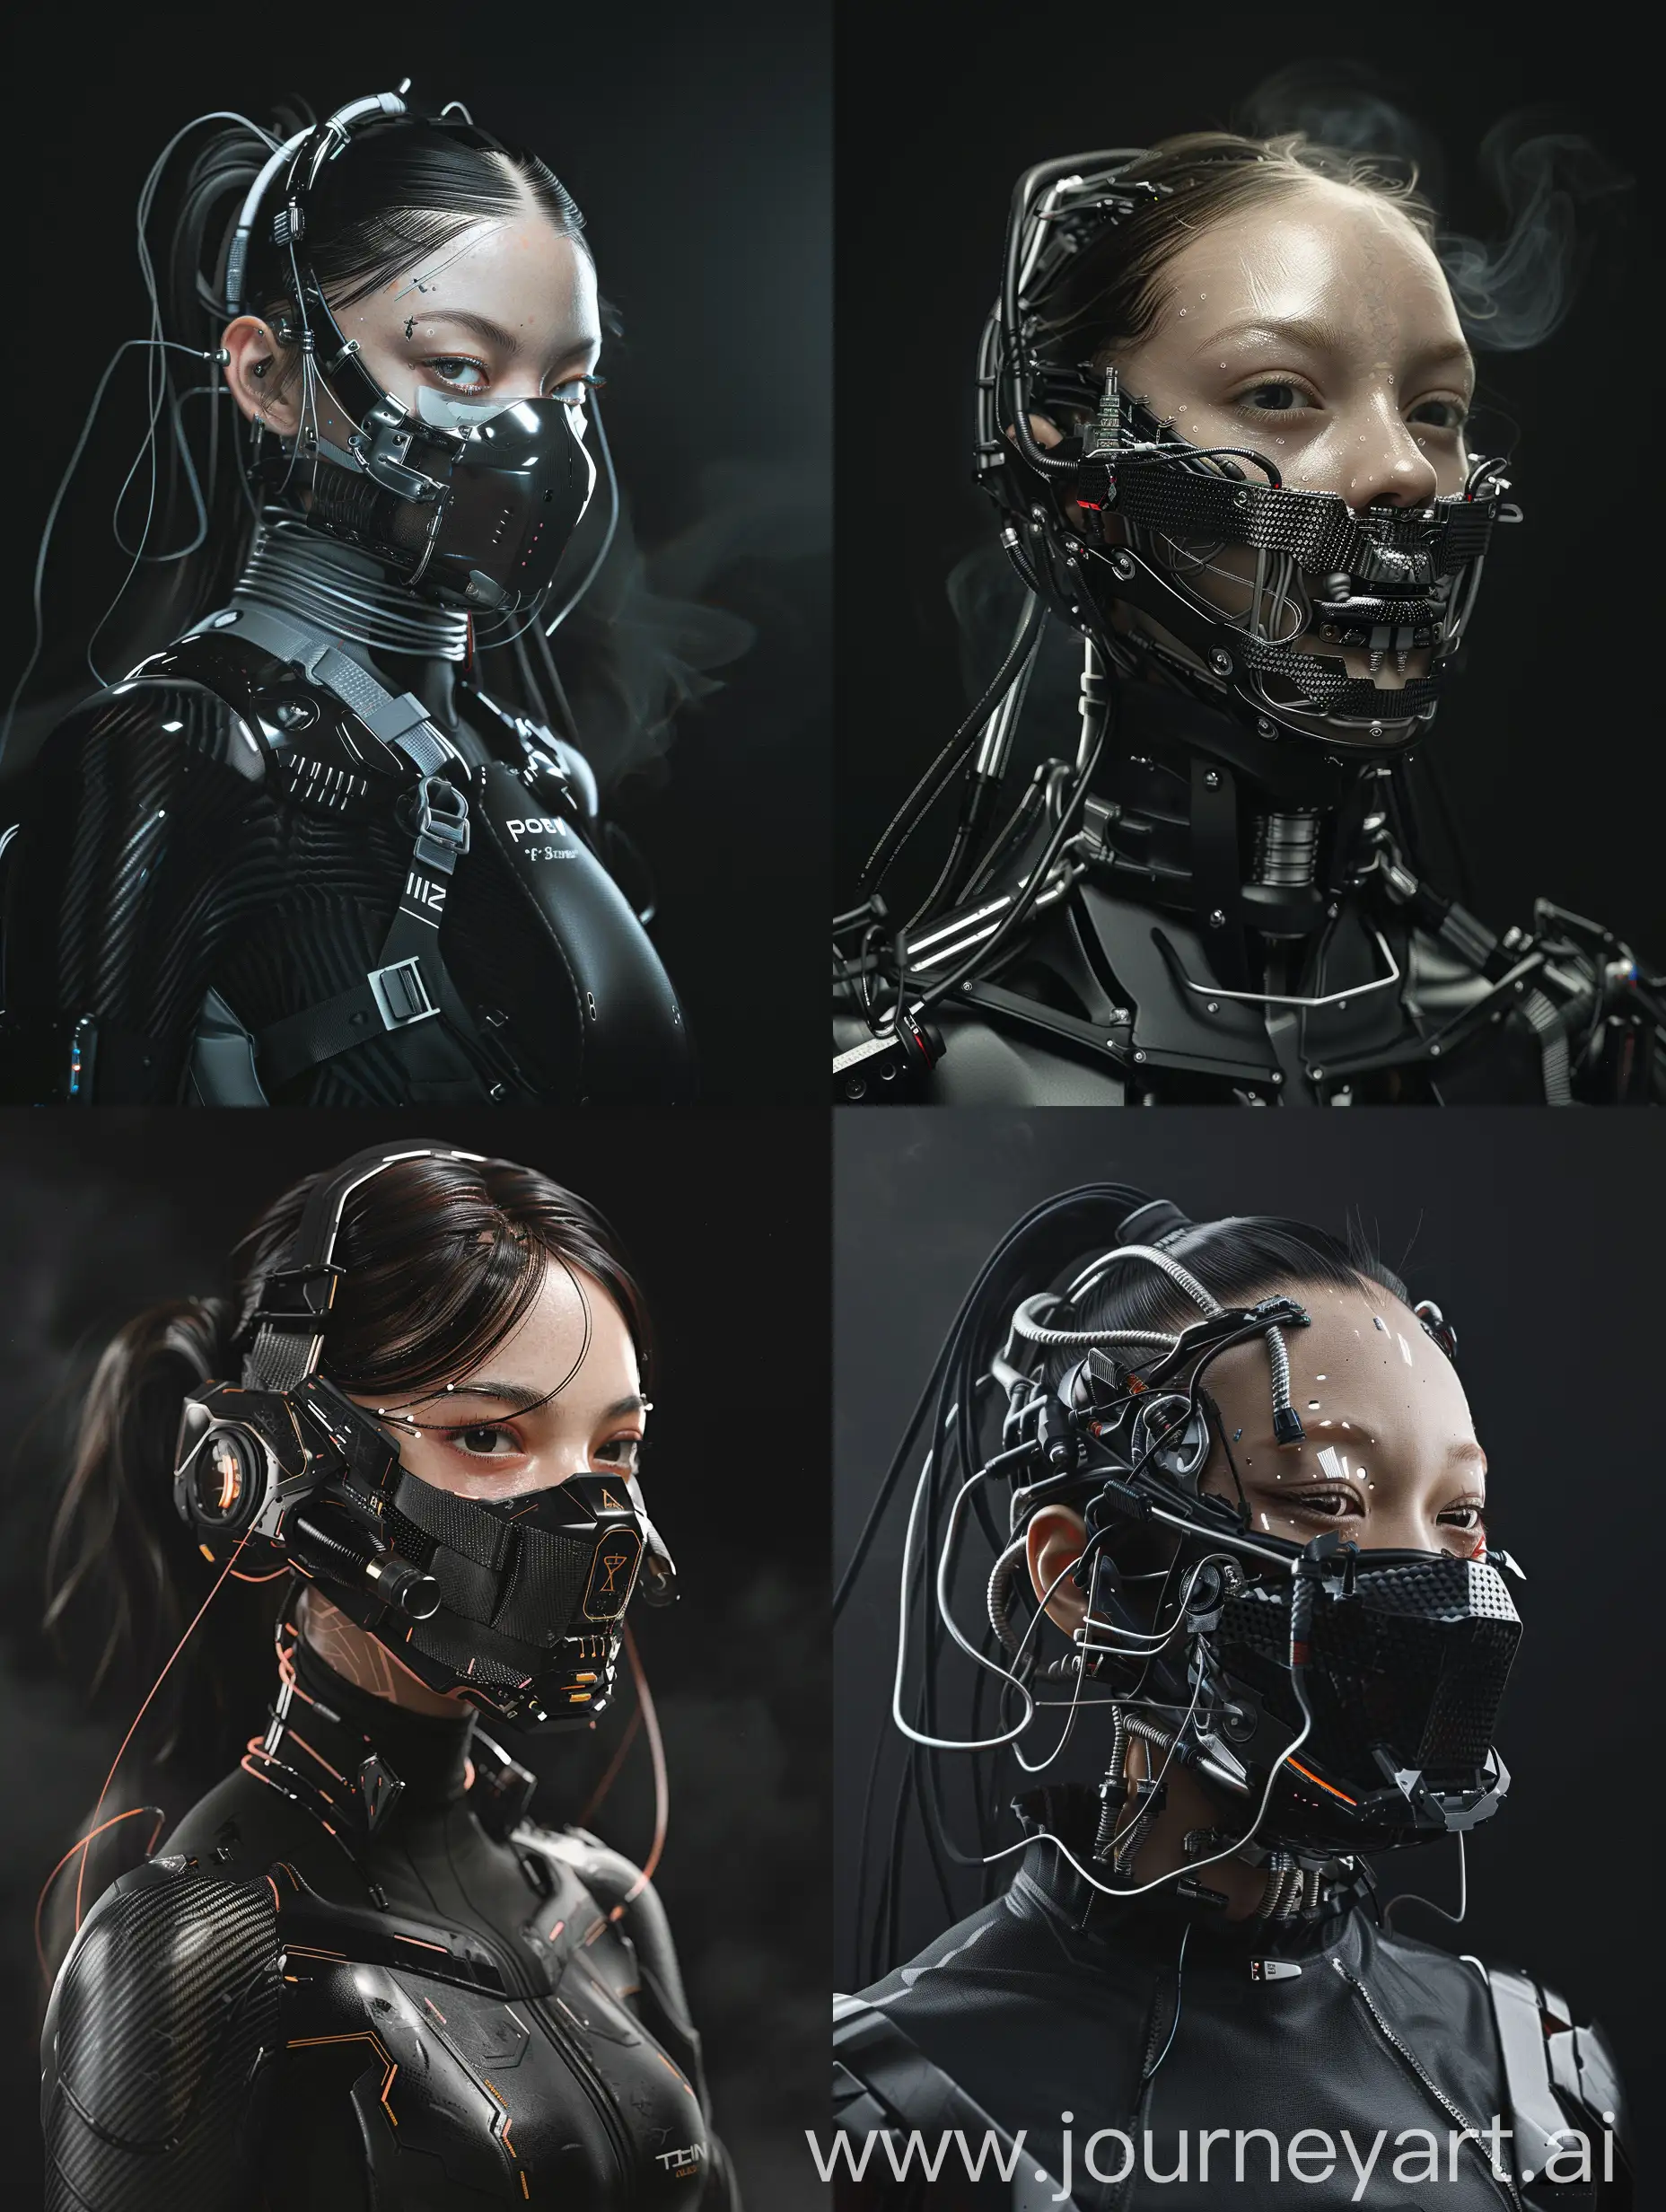 Against a sleek black backdrop, witness the captivating presence of a Beautiful characther adorned with a cybernetic mouth-covering mask. It seamlessly merges cutting-edge technology with intricate details, showcasing carbon fiber textures, sleek aluminum accents, and pulsating wires. Symbolizing the delicate equilibrium between humanity and machine, her appearance embodies the essence of a futuristic cyberpunk aesthetic, further accentuated by Supreme-inspired add-ons. With dynamic movements reminiscent of action-packed film sequences, accompanied by cinematic haze and an electric energy, she exudes an irresistible allure that commands attention